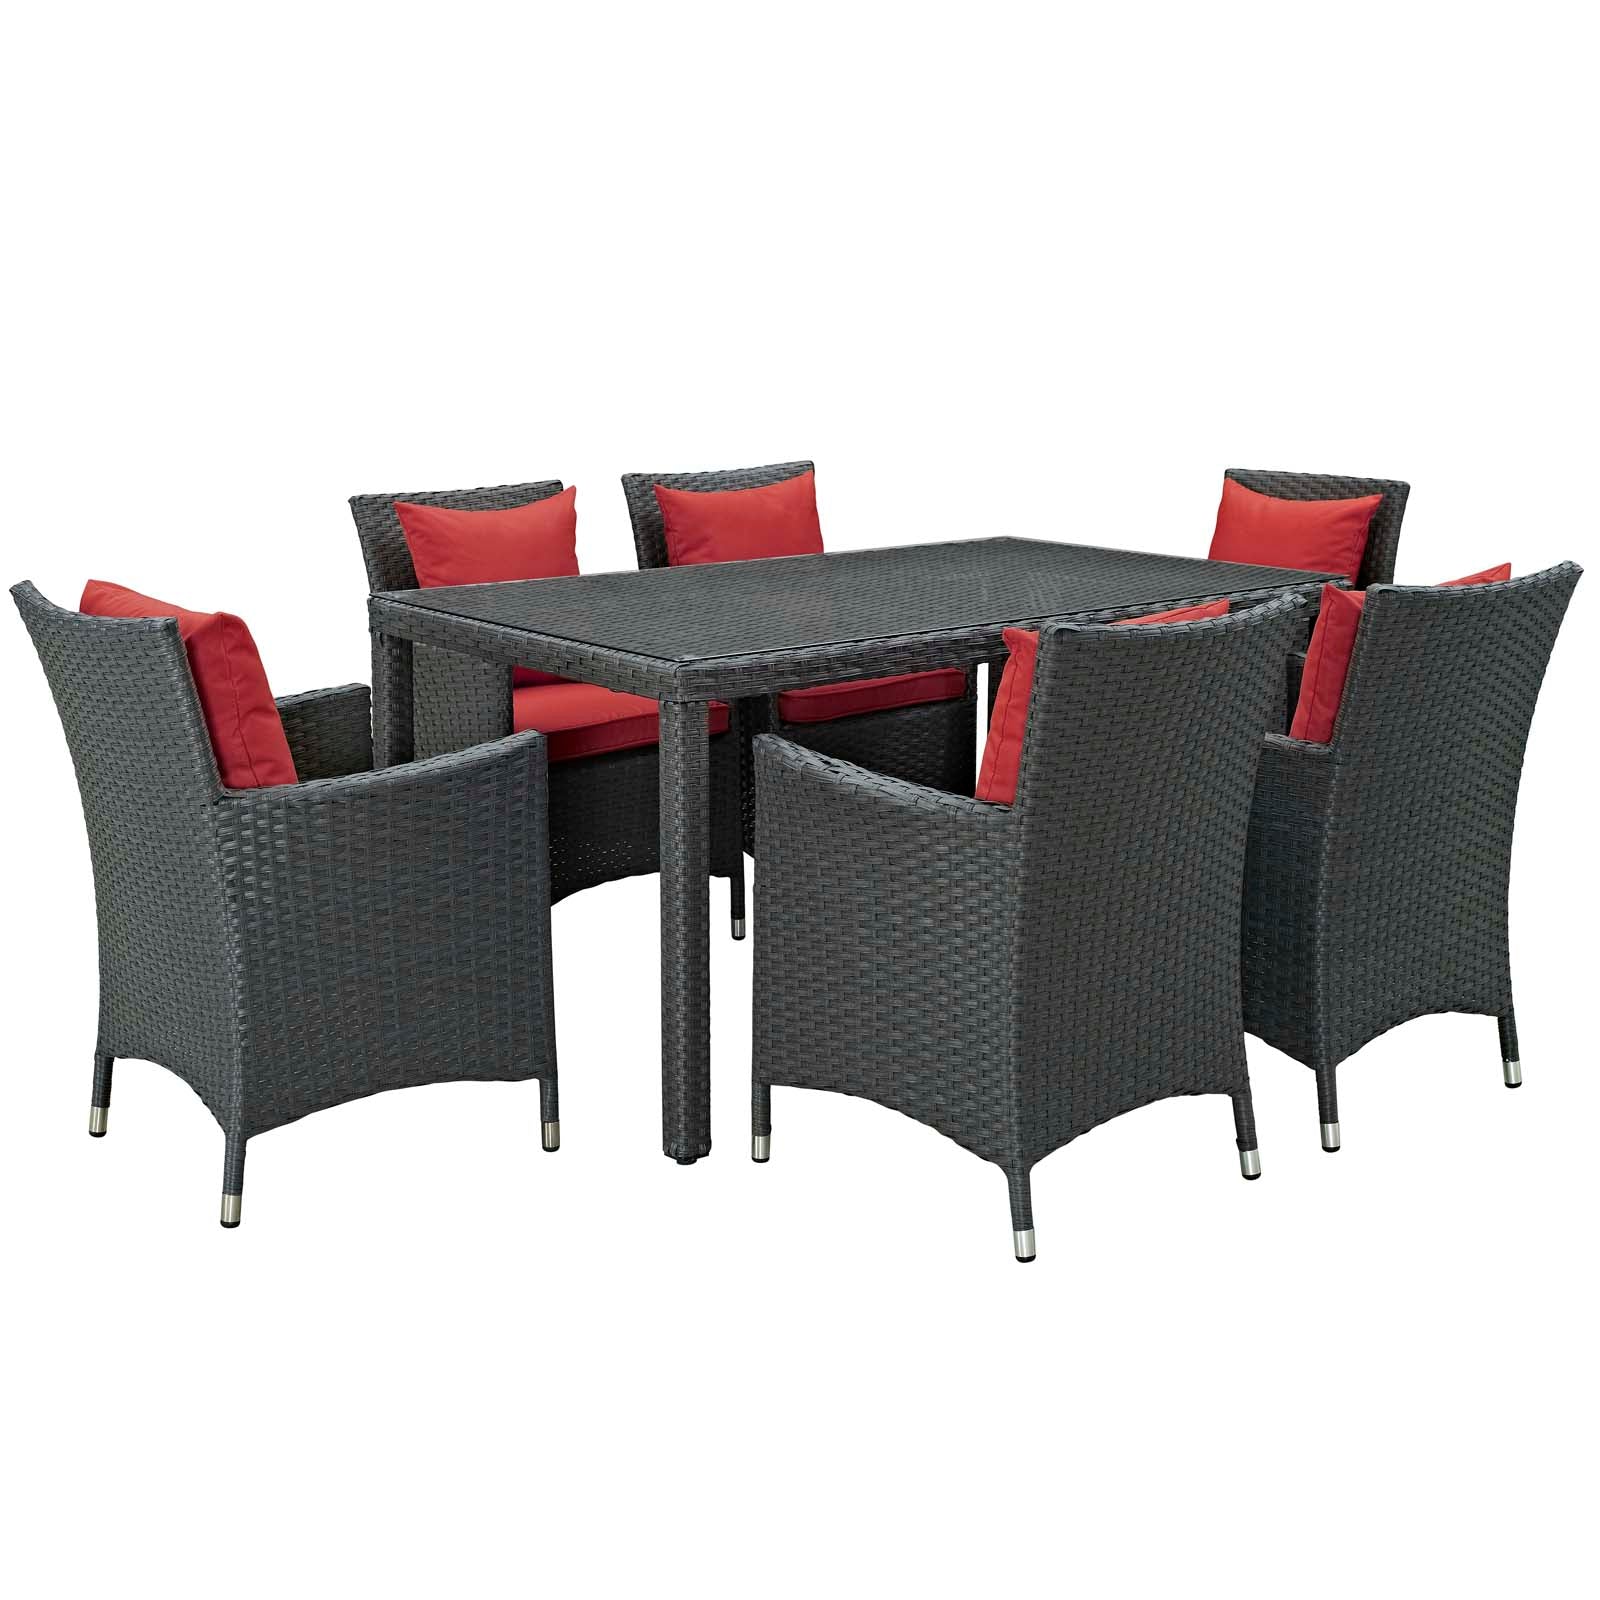 Modway Outdoor Dining Sets - Sojourn 7 Piece Outdoor Patio Sunbrella Dining Set Canvas Red